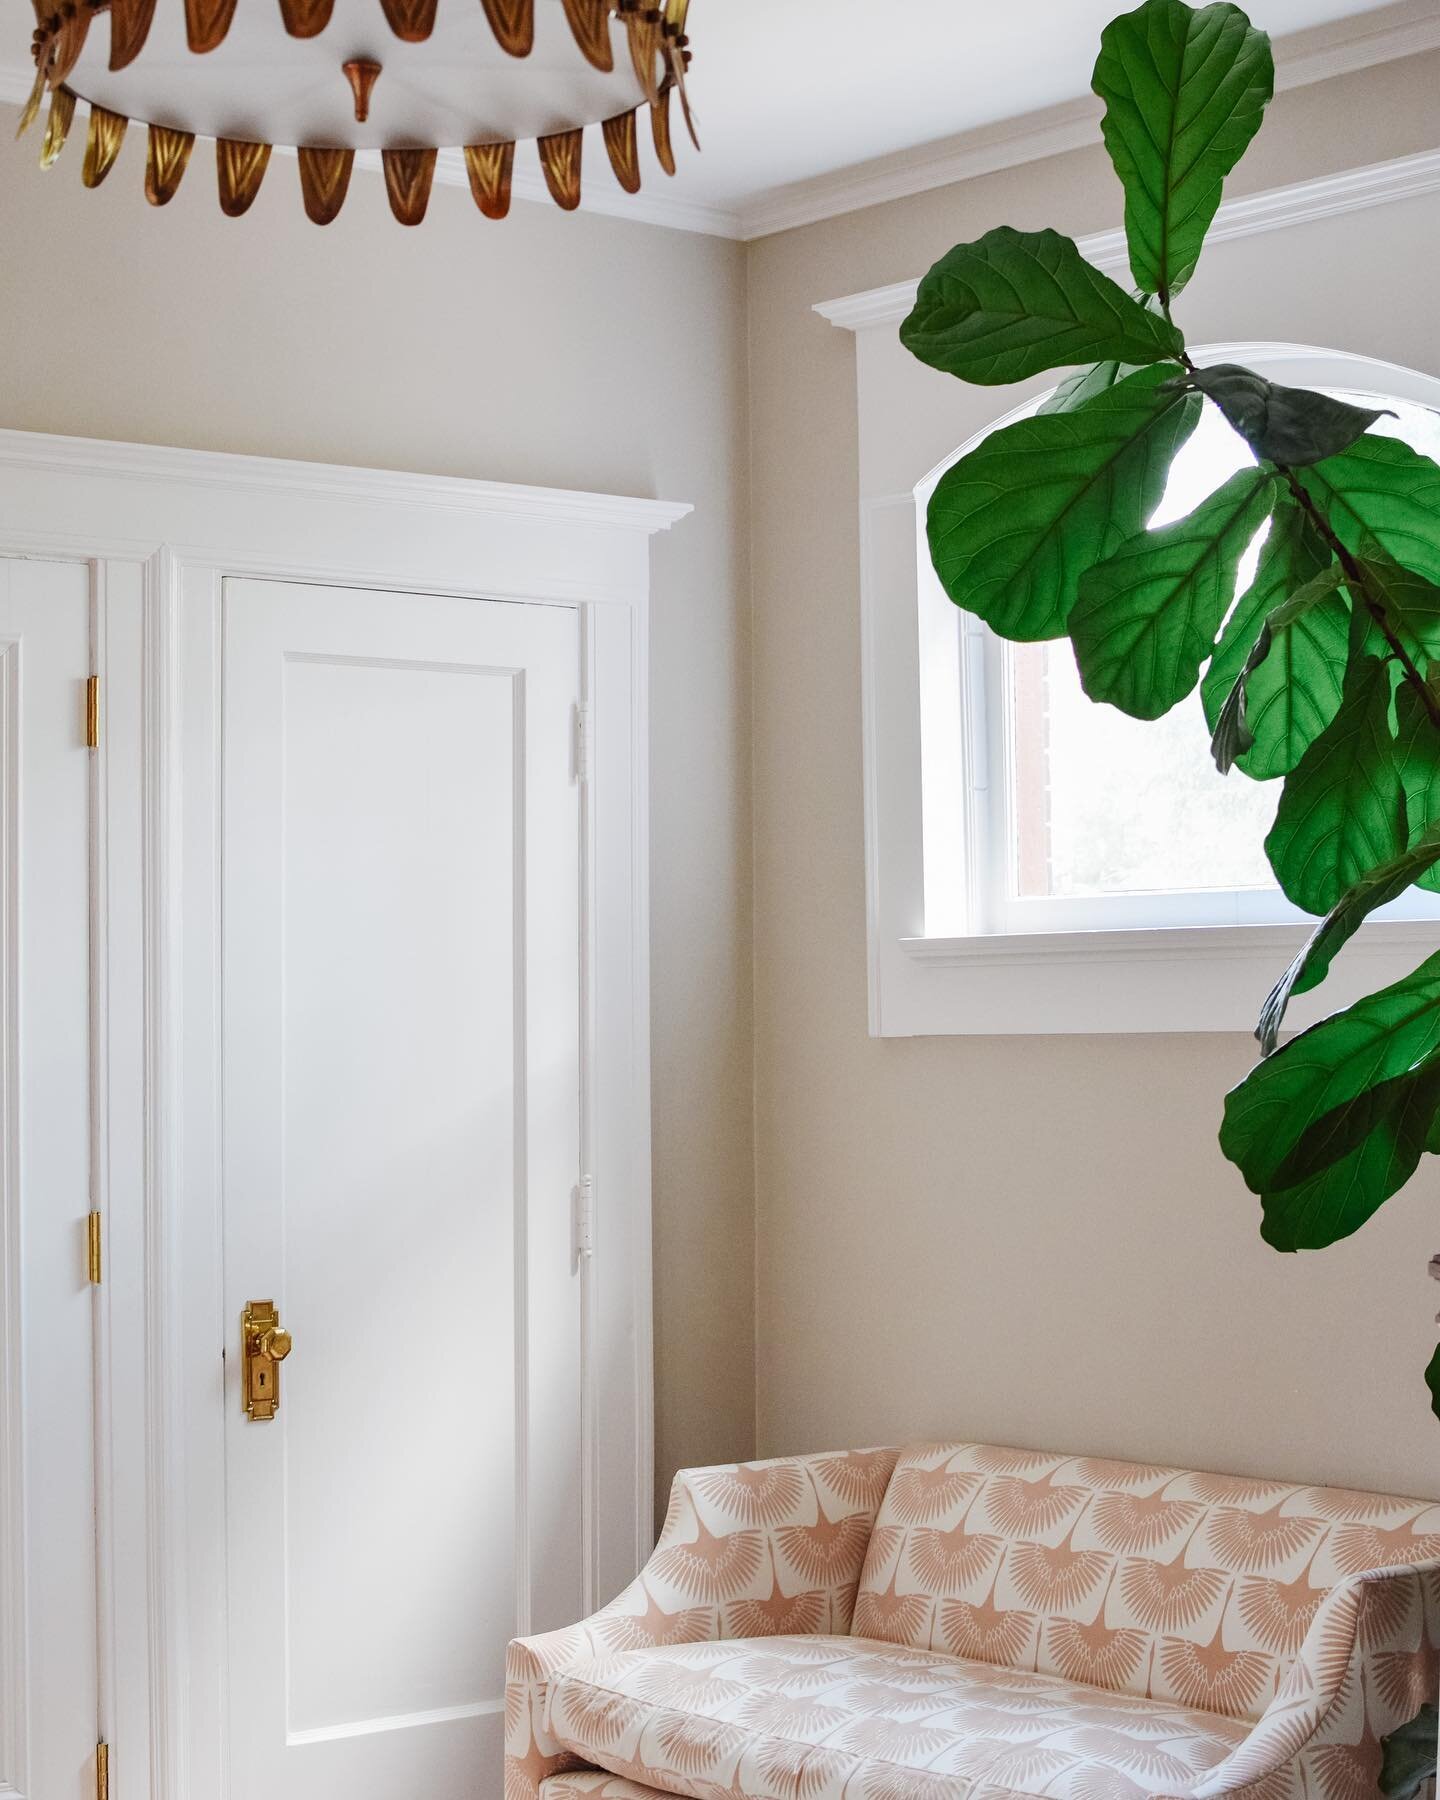 A happy little settee and fig tree 🌱
&mdash;
#interiordesign #interiordesigner #interiordecorating #foyer #foyerdecor #foyerdesign #foyerlighting #settee #postitforaesthetic #luxeathome #myhousebeautiful #thehappynow #inmydomaine #flashesofdelight #